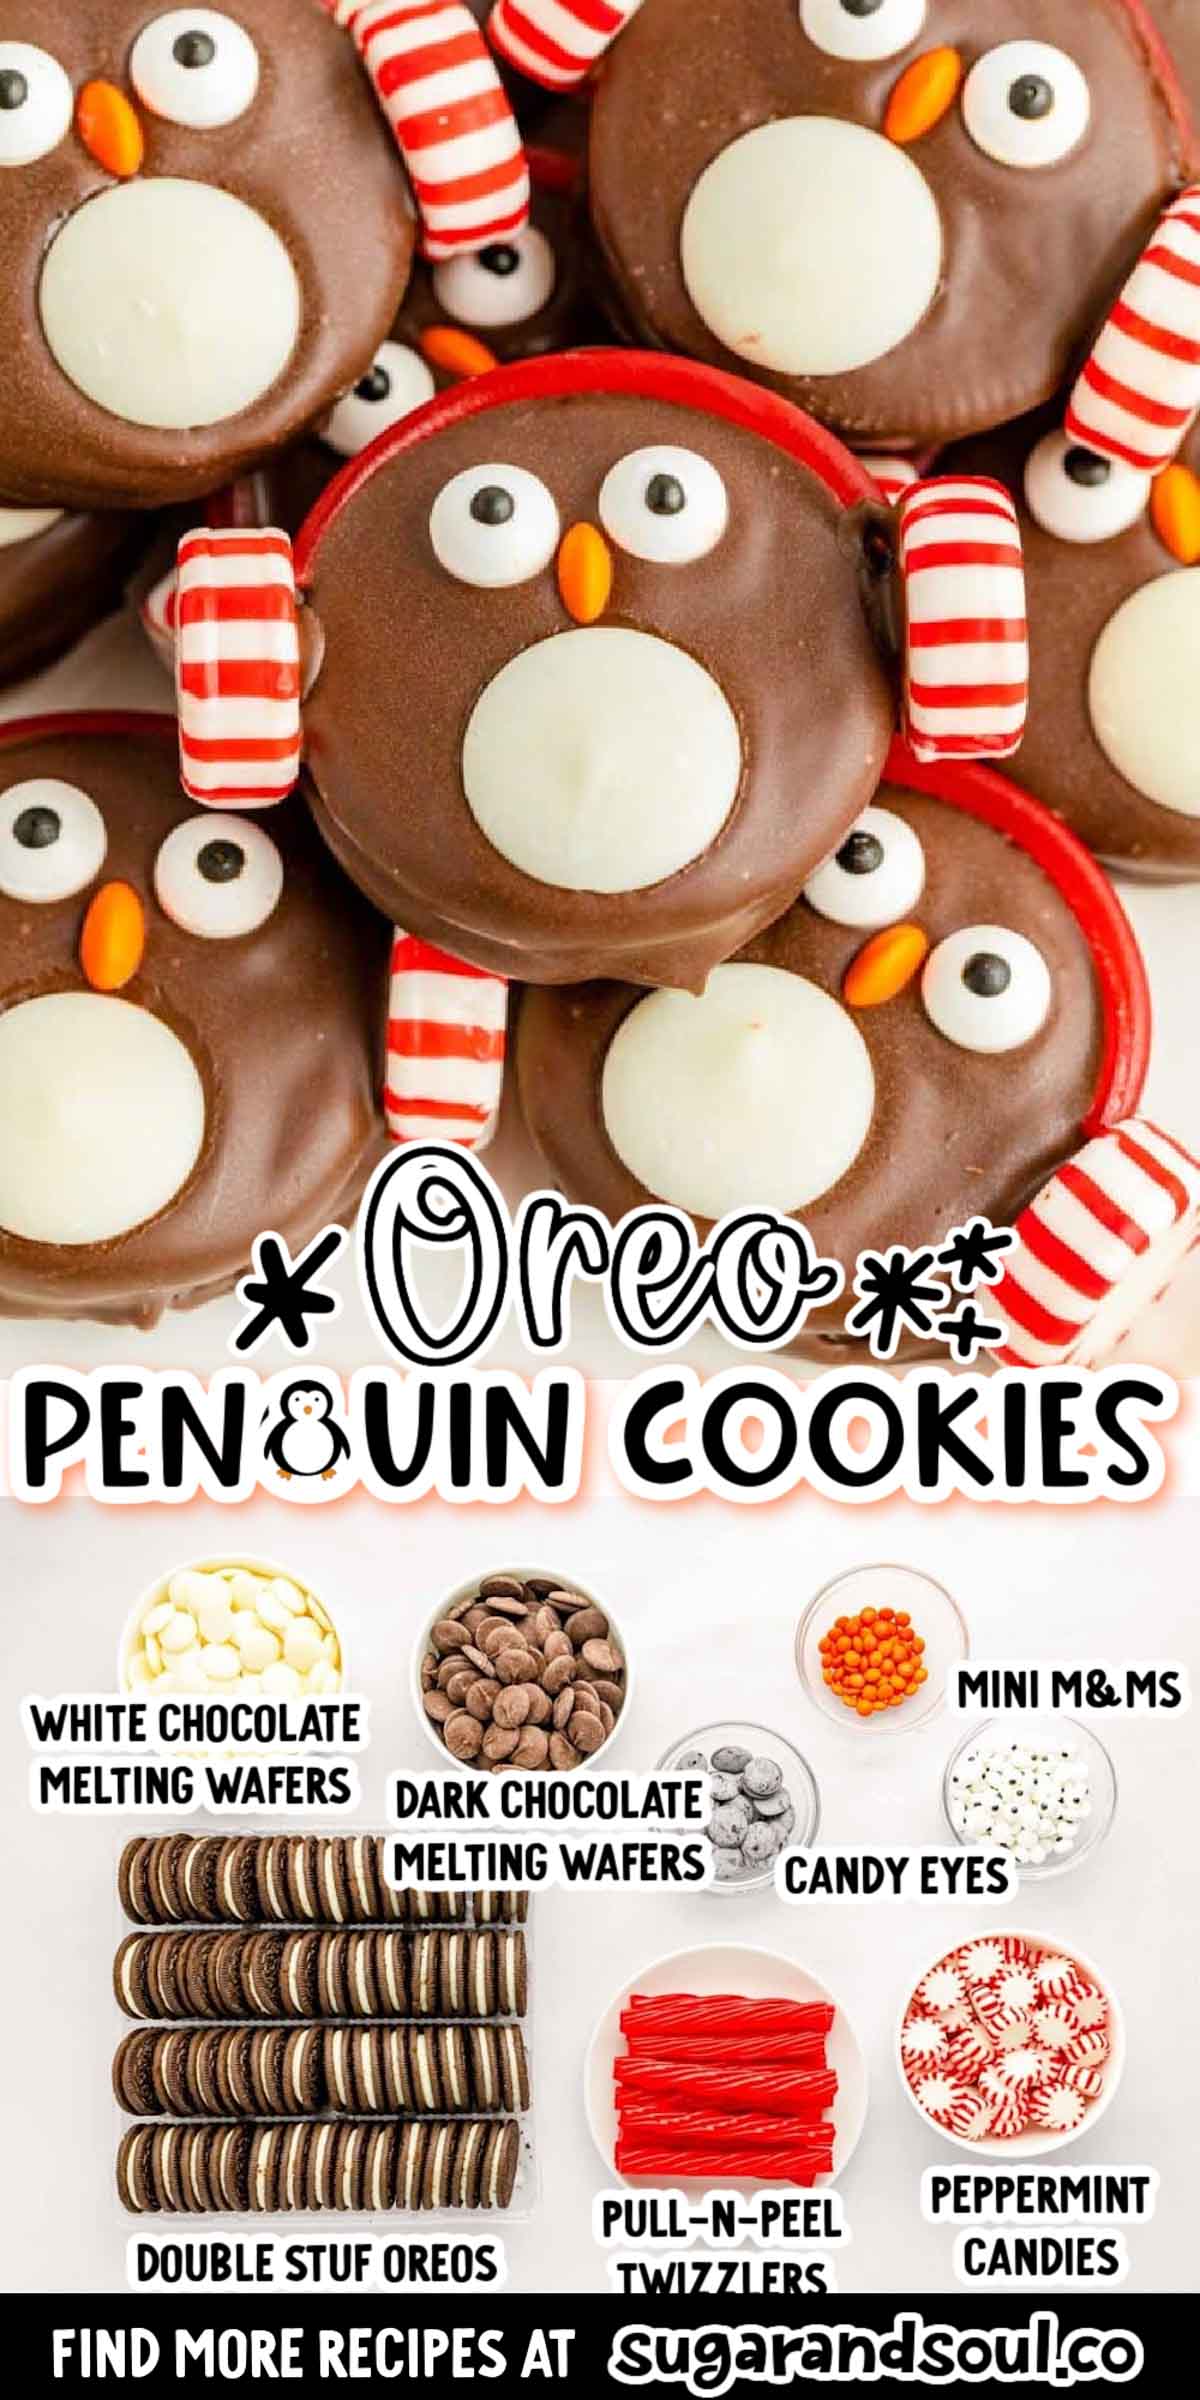 Oreo Penguin Cookies are dipped in dark chocolate and brought to life with candy eyes, M&Ms, candy melts, peppermint candies, and Twizzlers!  via @sugarandsoulco